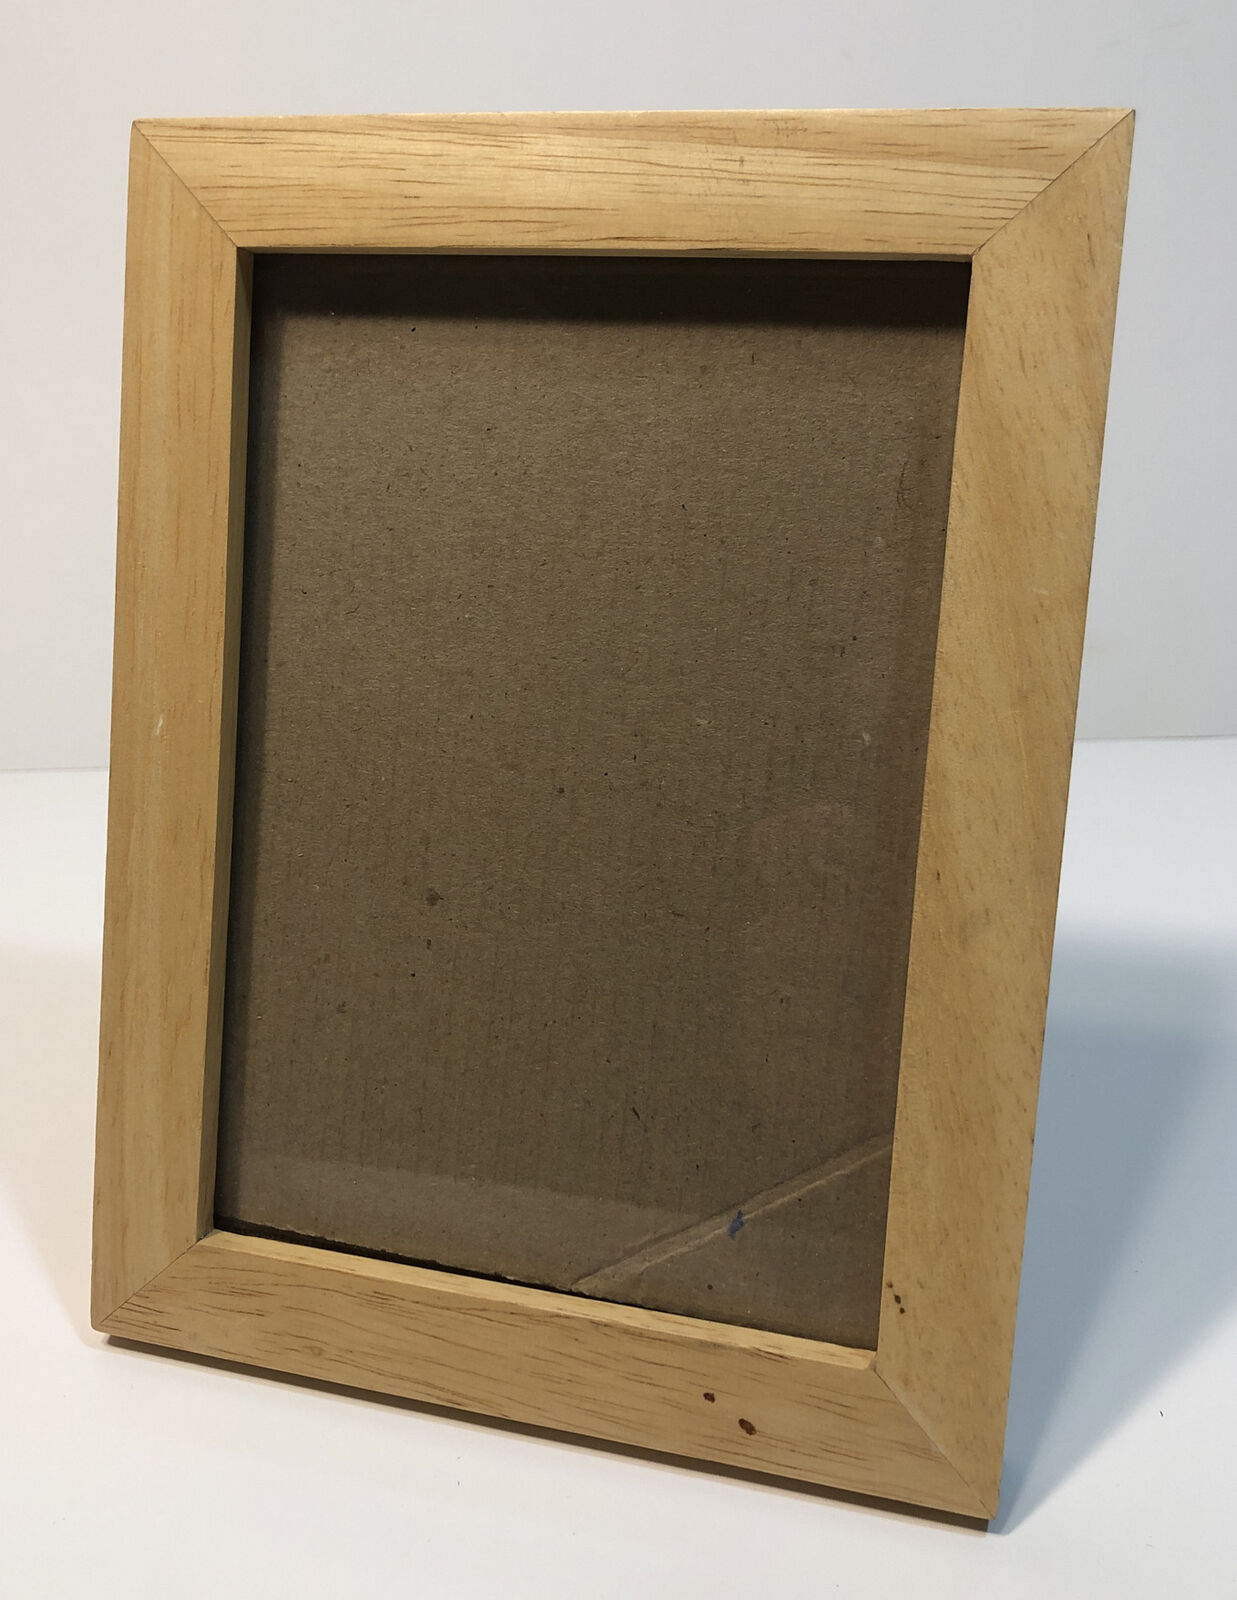 5x7 Wood Wooden Light Brown Tan Beige Picture Frame